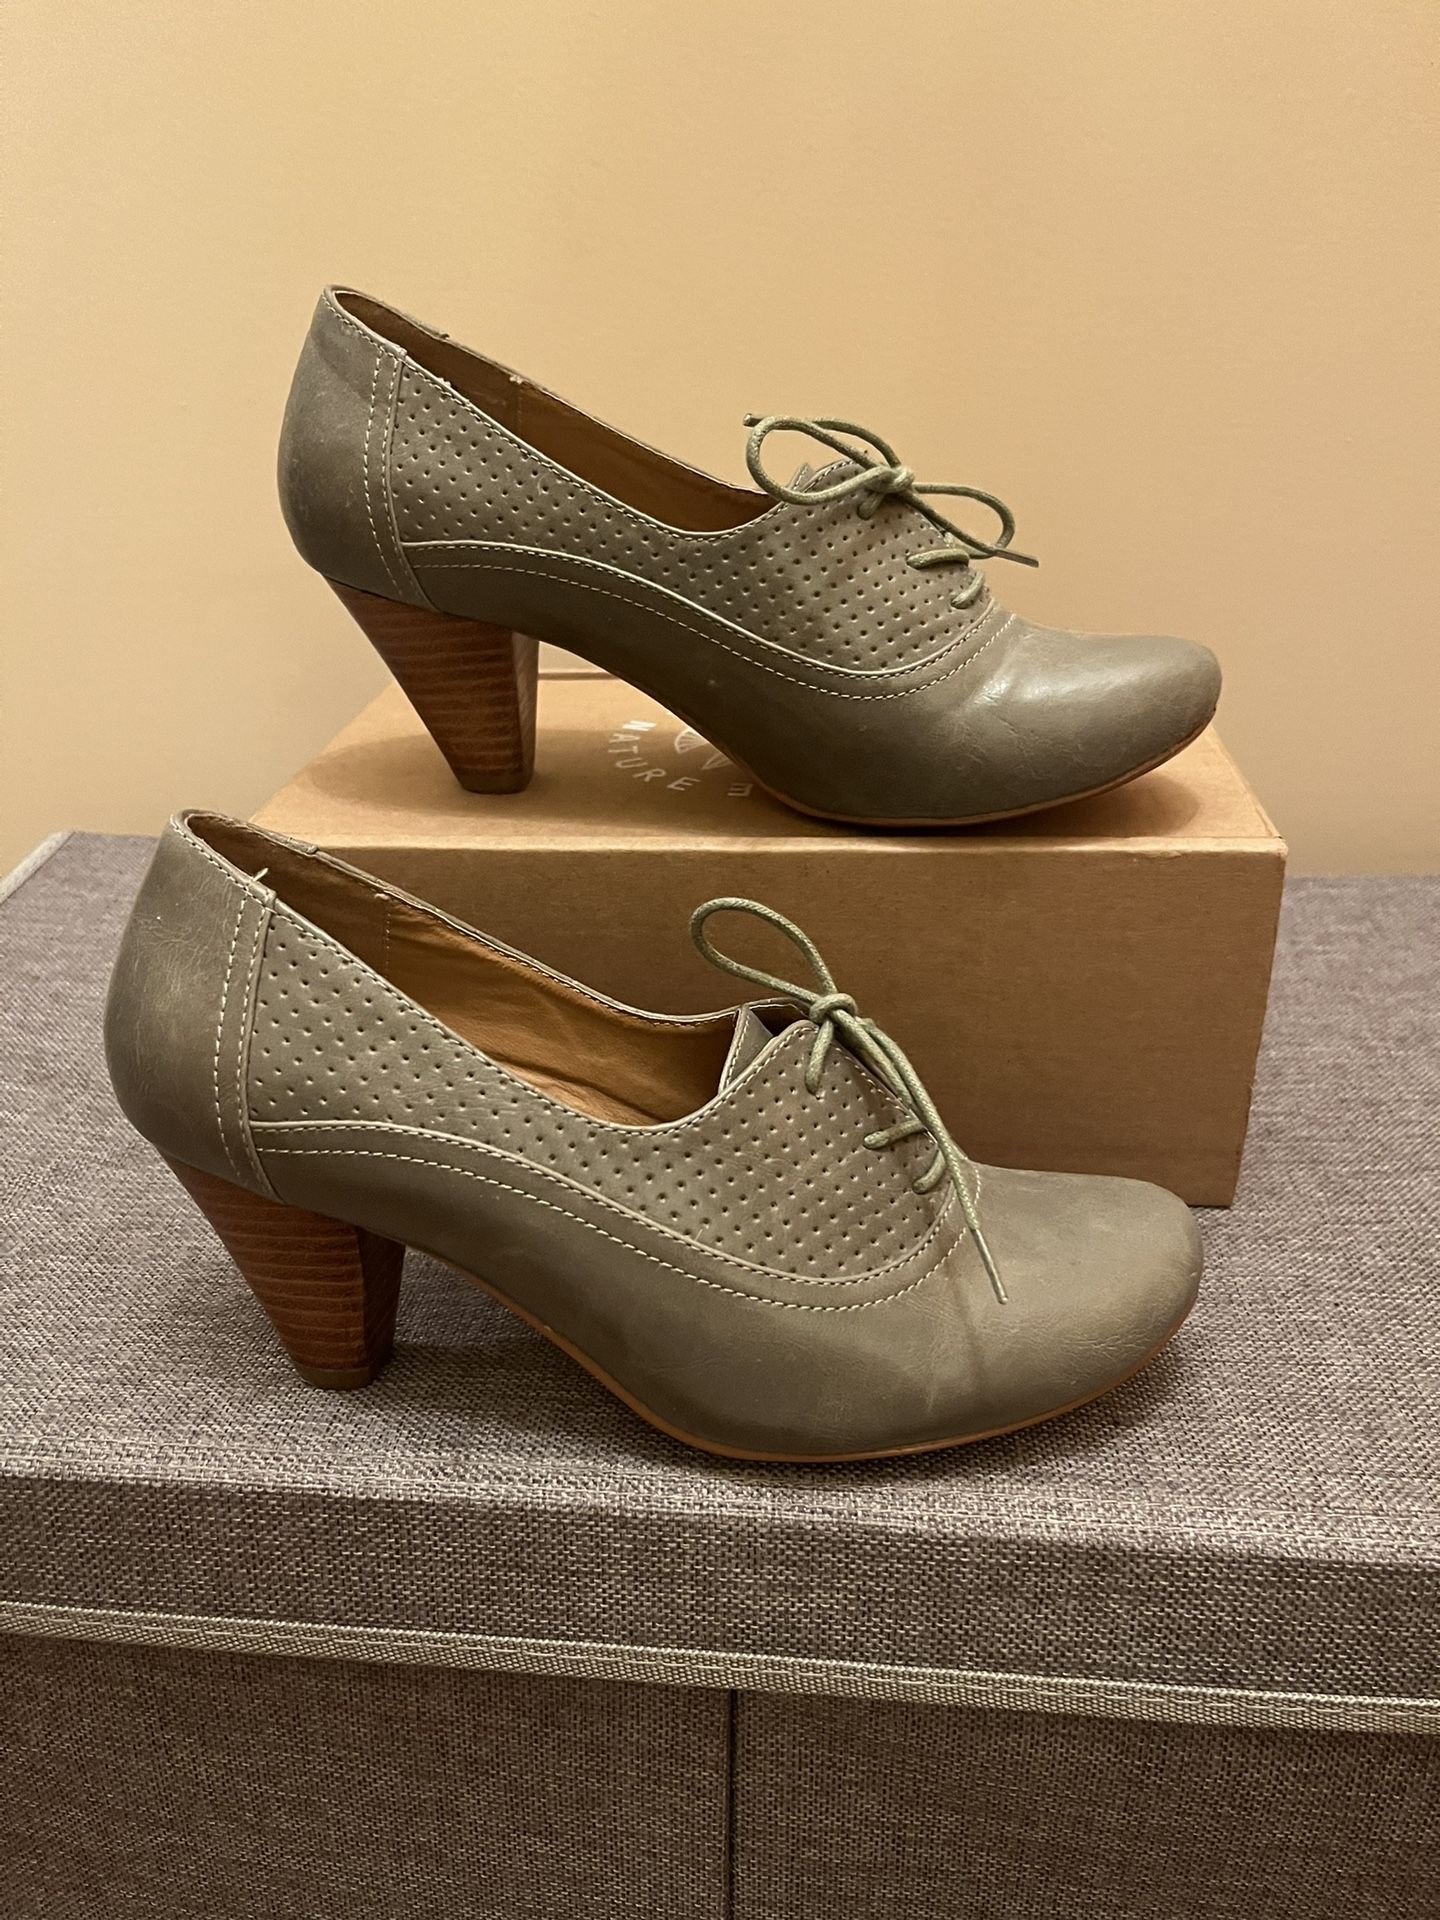 Very pretty bakers shoes for women. Gray color. Small comfortable heel. With shoe lace in the front. In great condition. Size 8